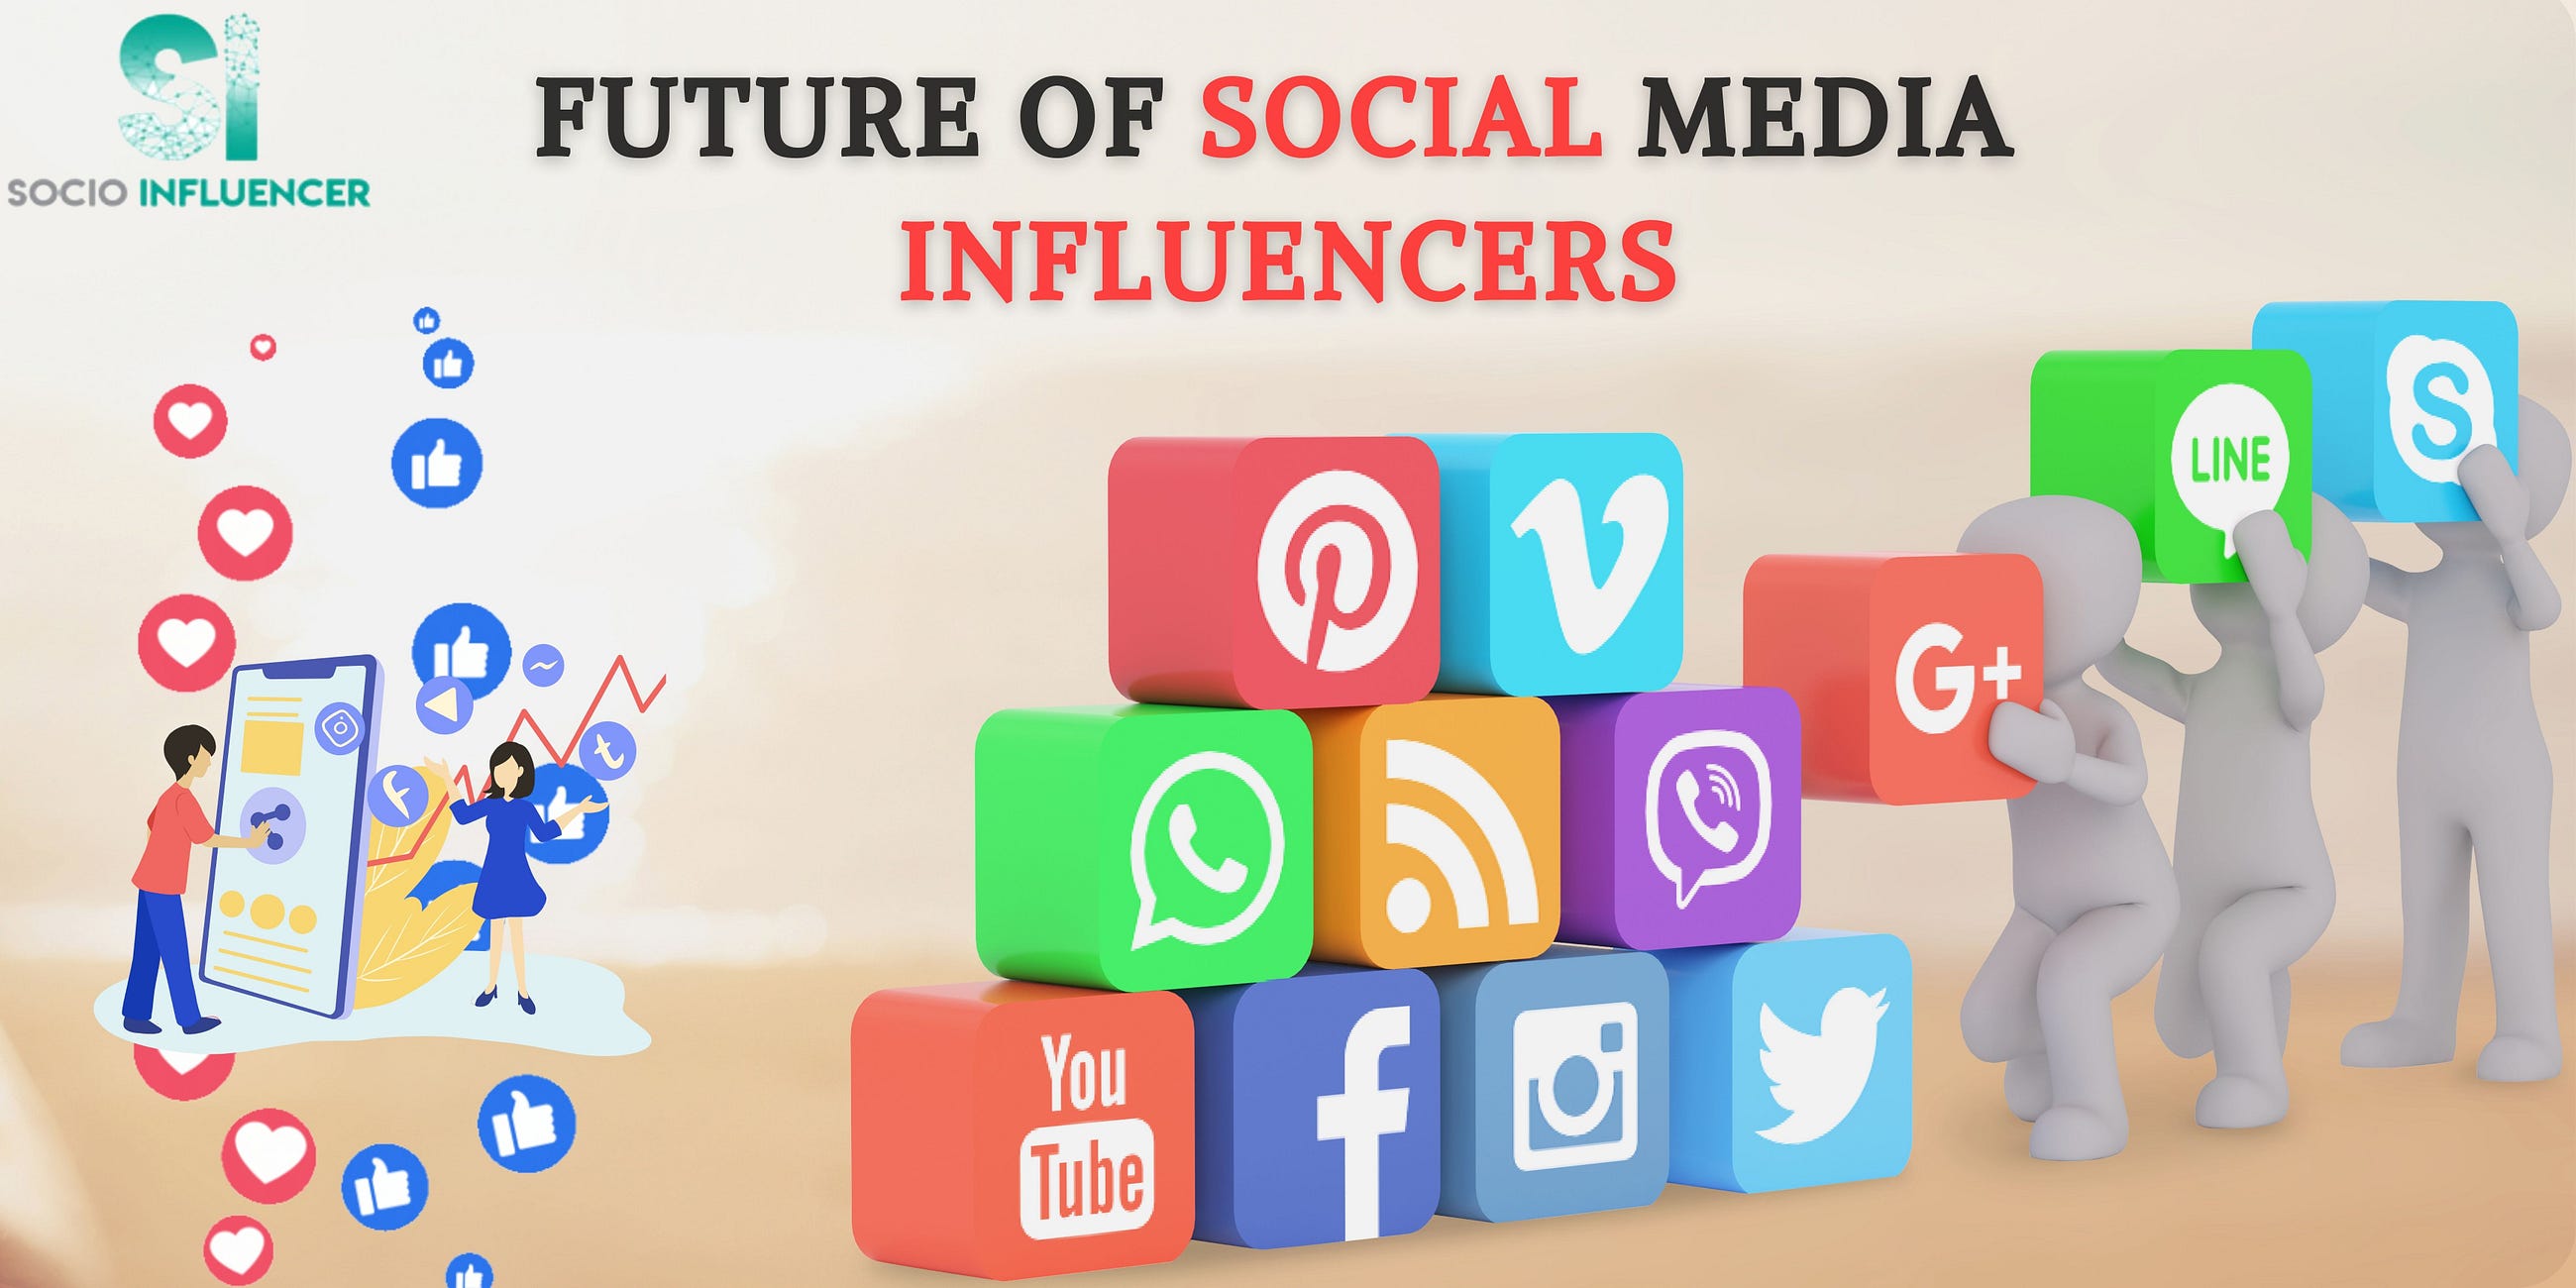 Social Media Influencers: What’s the Future?